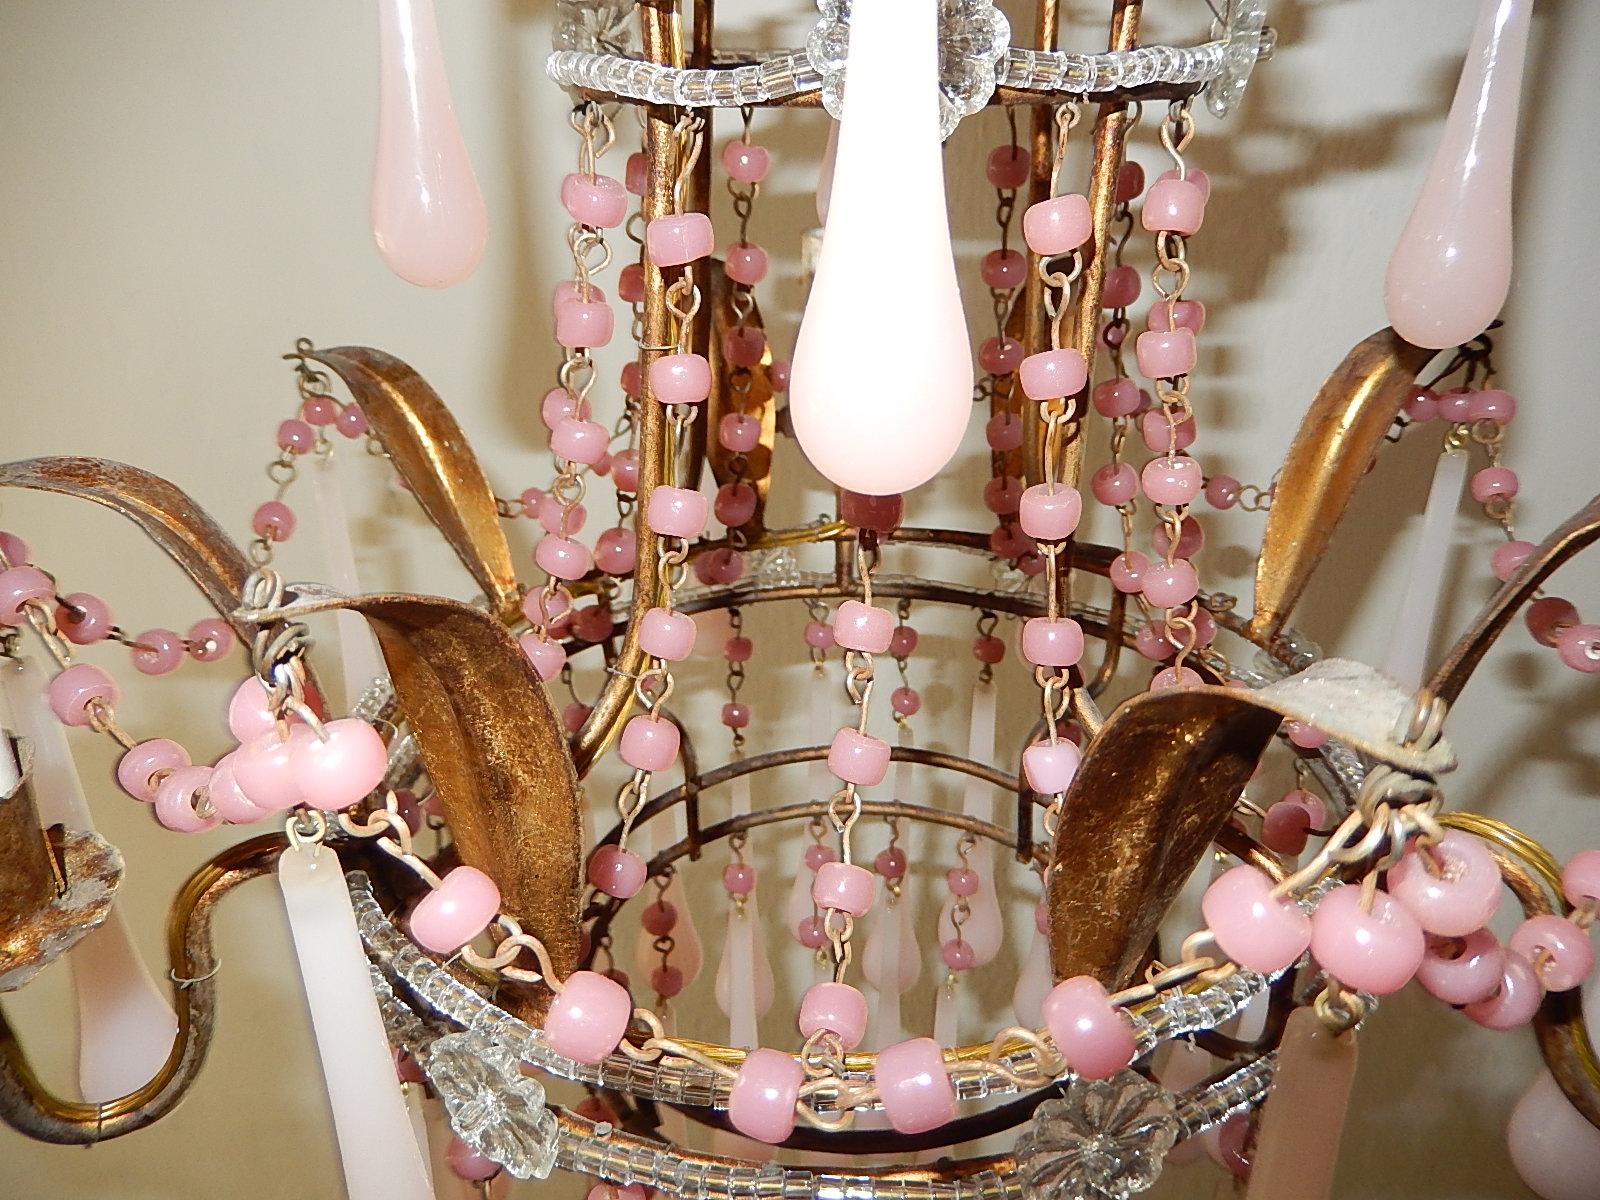 Mid-20th Century Italian Pink Opaline Crystal Beaded Murano Drops Chandelier circa 1930 For Sale